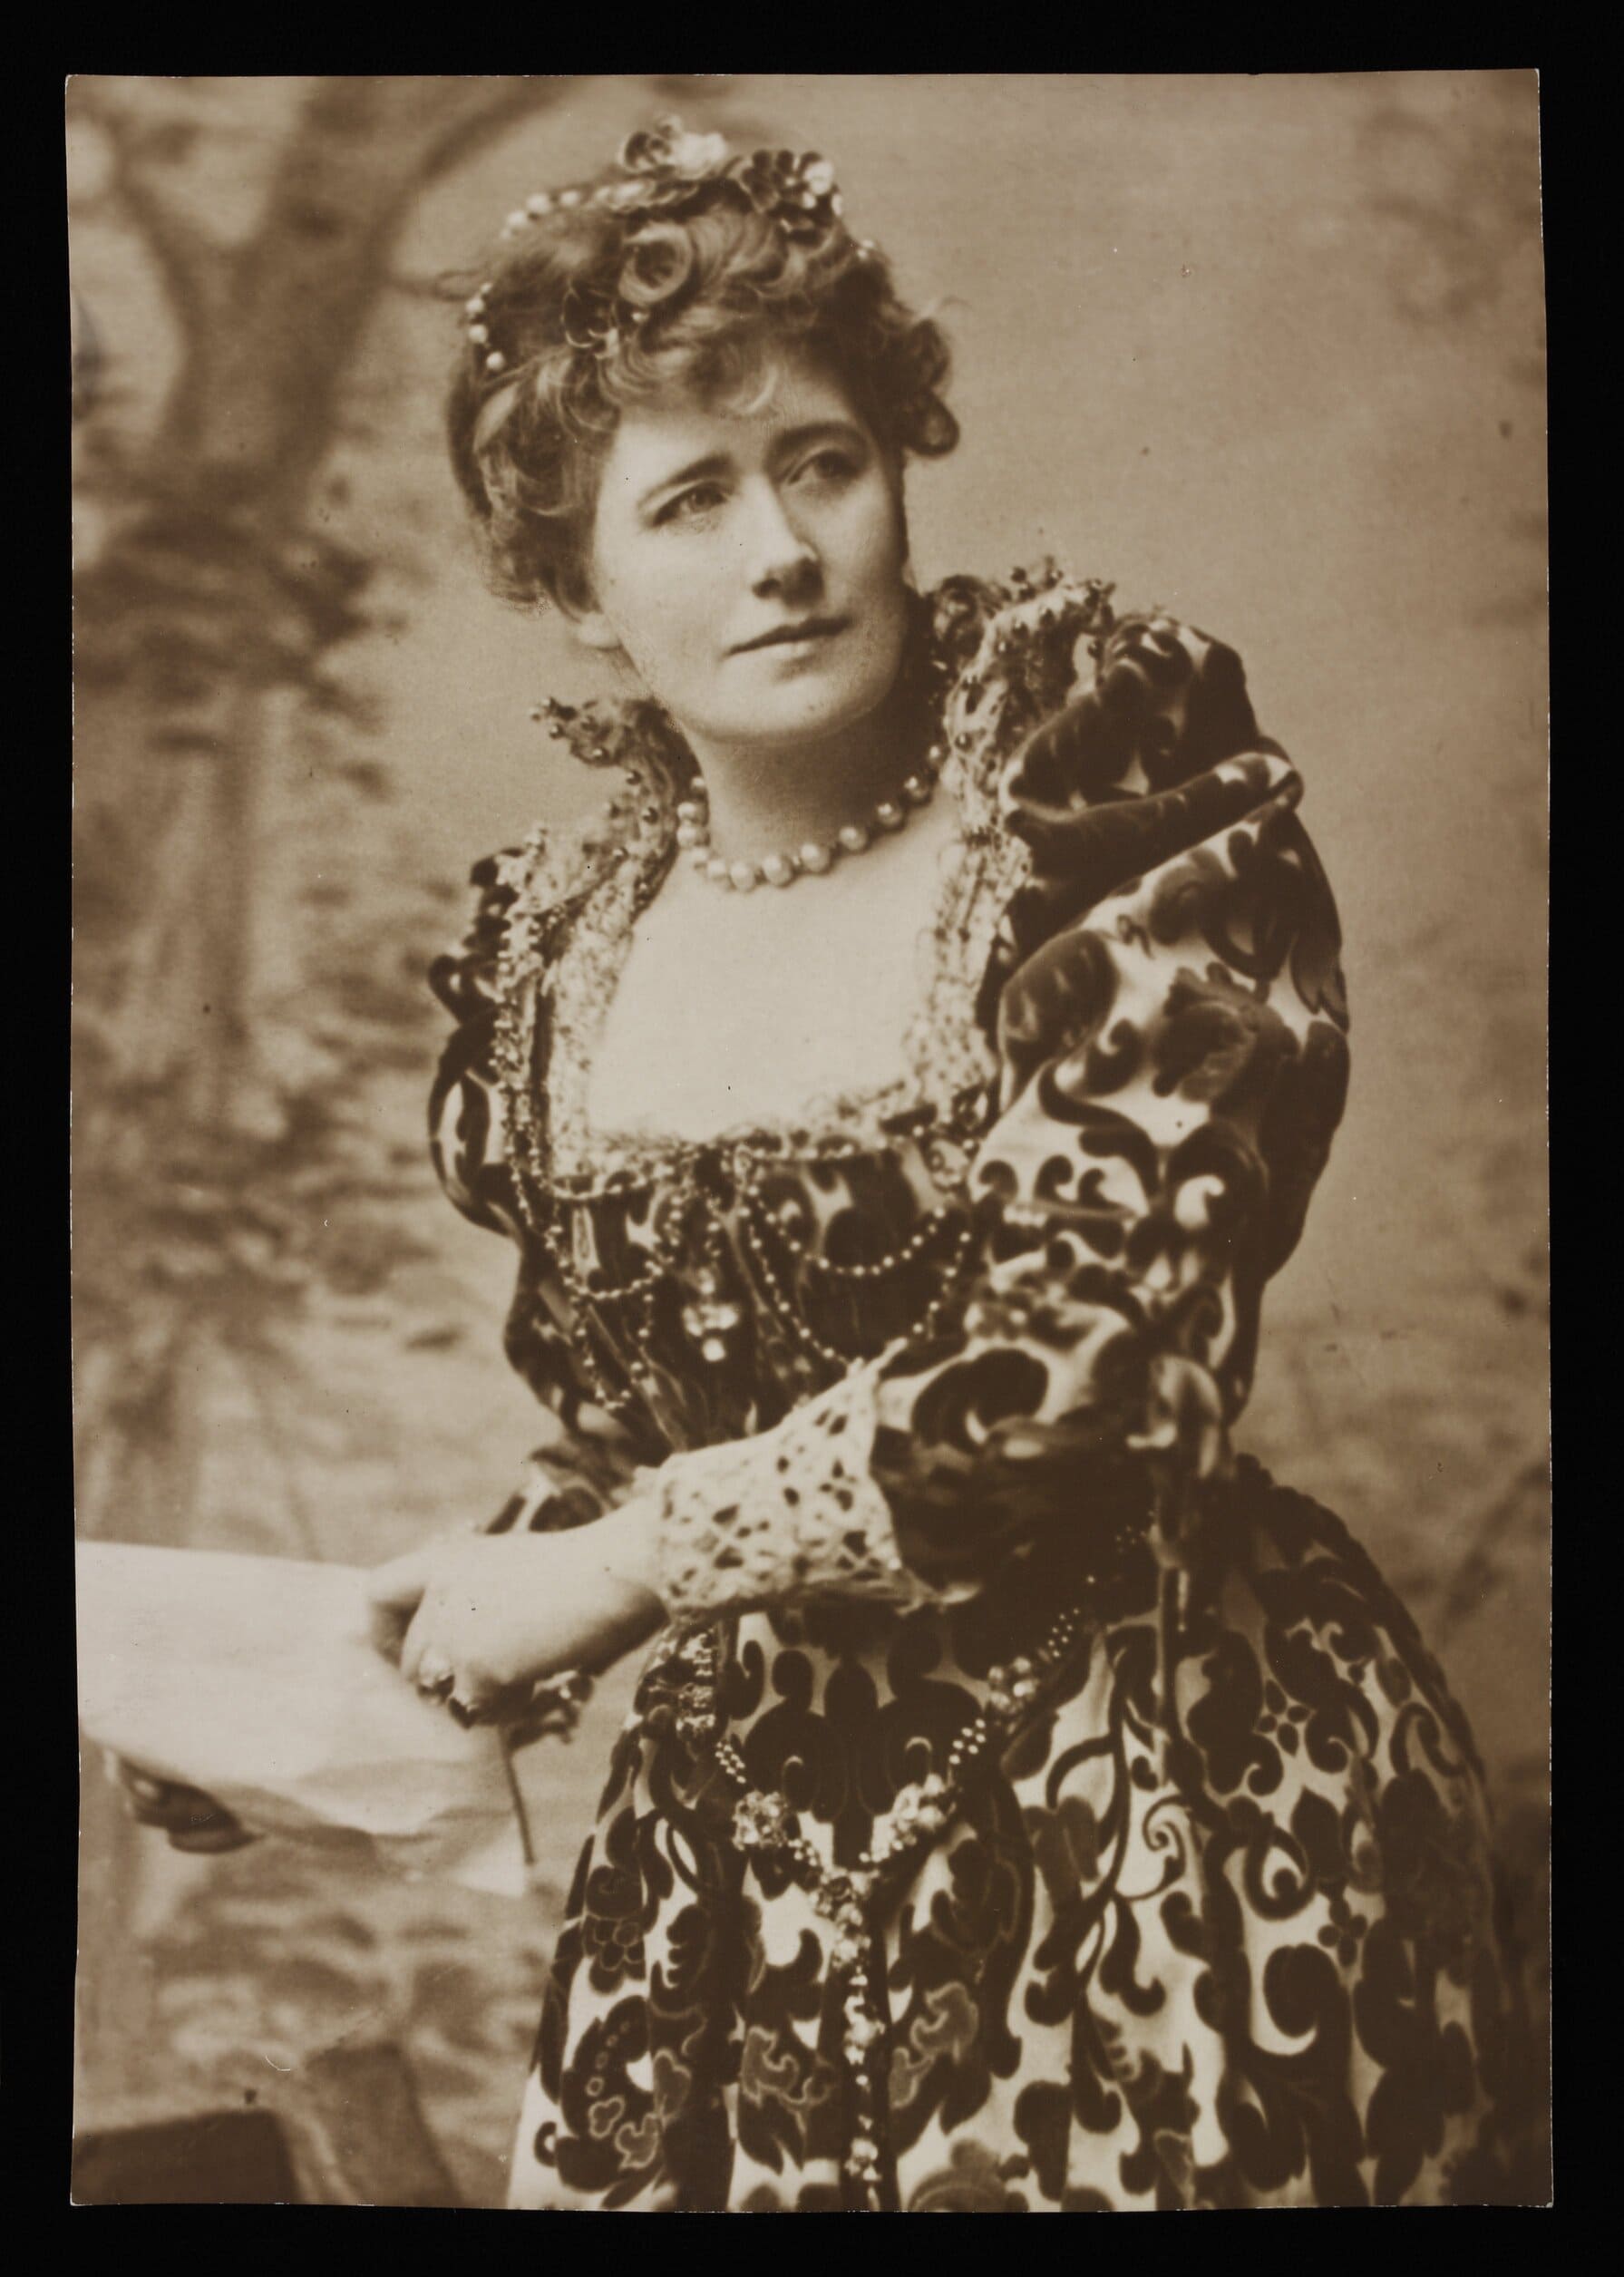 Photo of Ellen Terry in the role of 'Beatrice' for the 1882 production of 'Much Ado About Nothing' at the Lyceum Theatre ©Victoria and Albert Museum, London